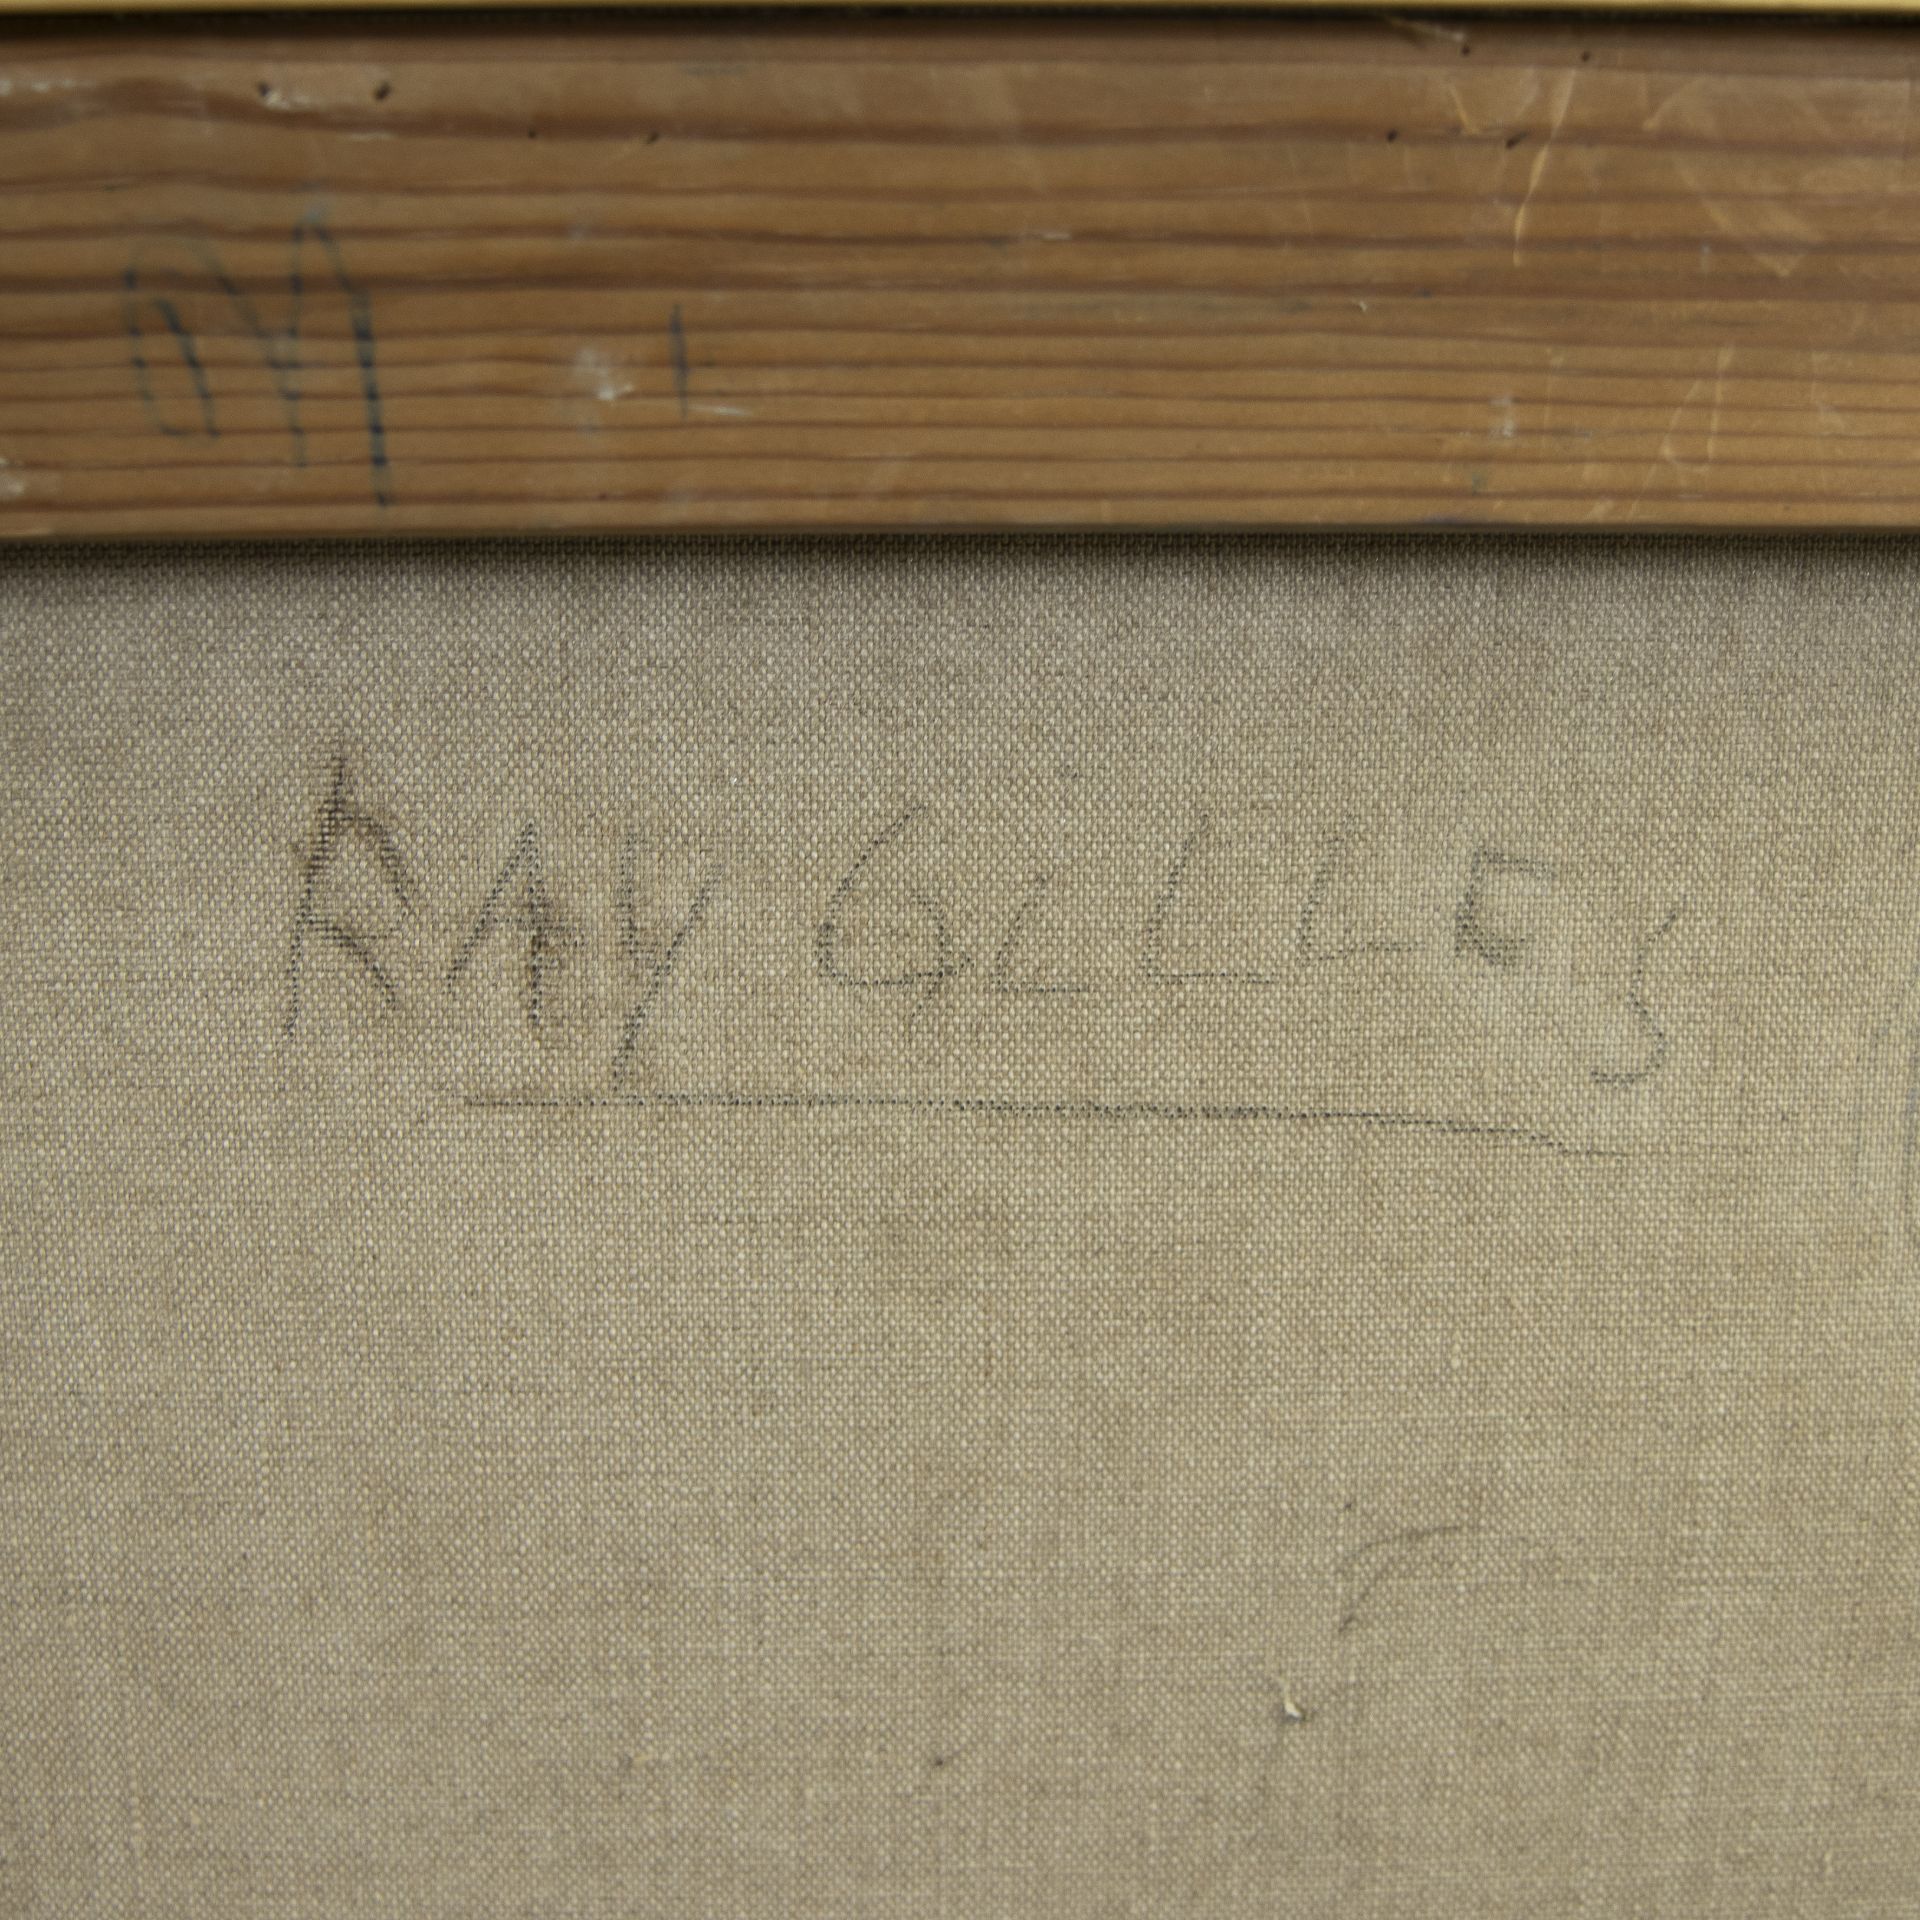 Ray GILLES (1923), oil on canvas Composition, signed verso - Image 3 of 6